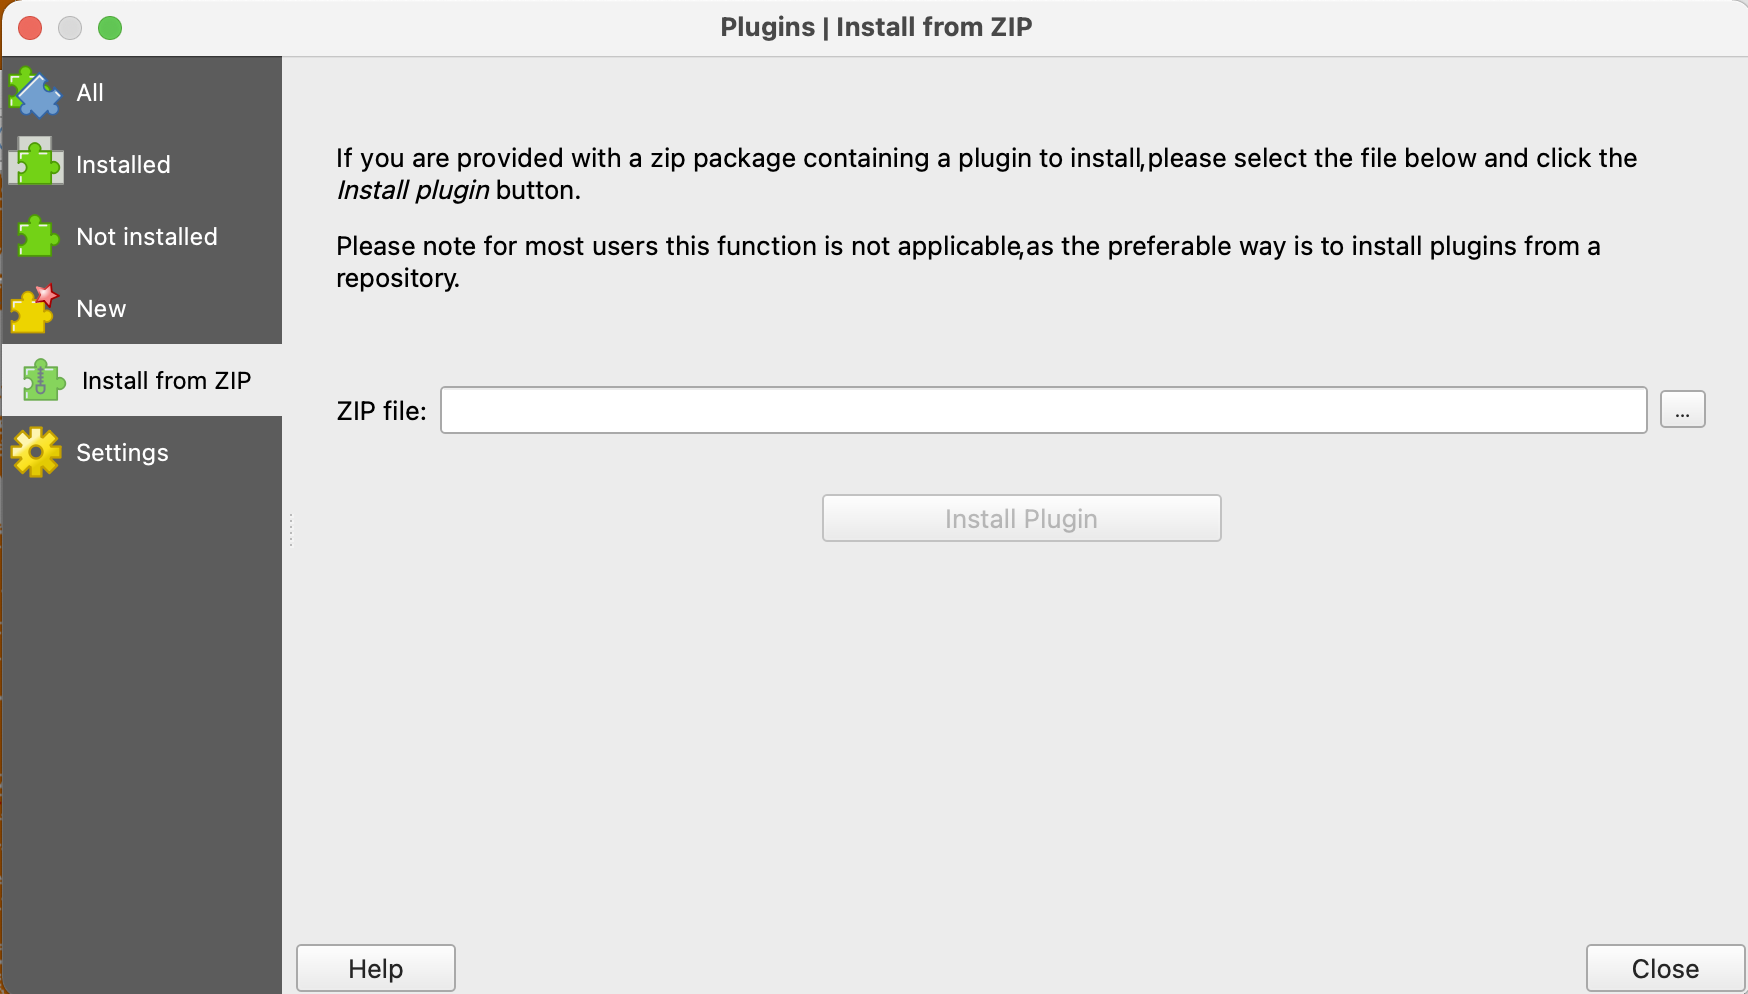 The WhiteboxTools QGIS plugin install from ZIP